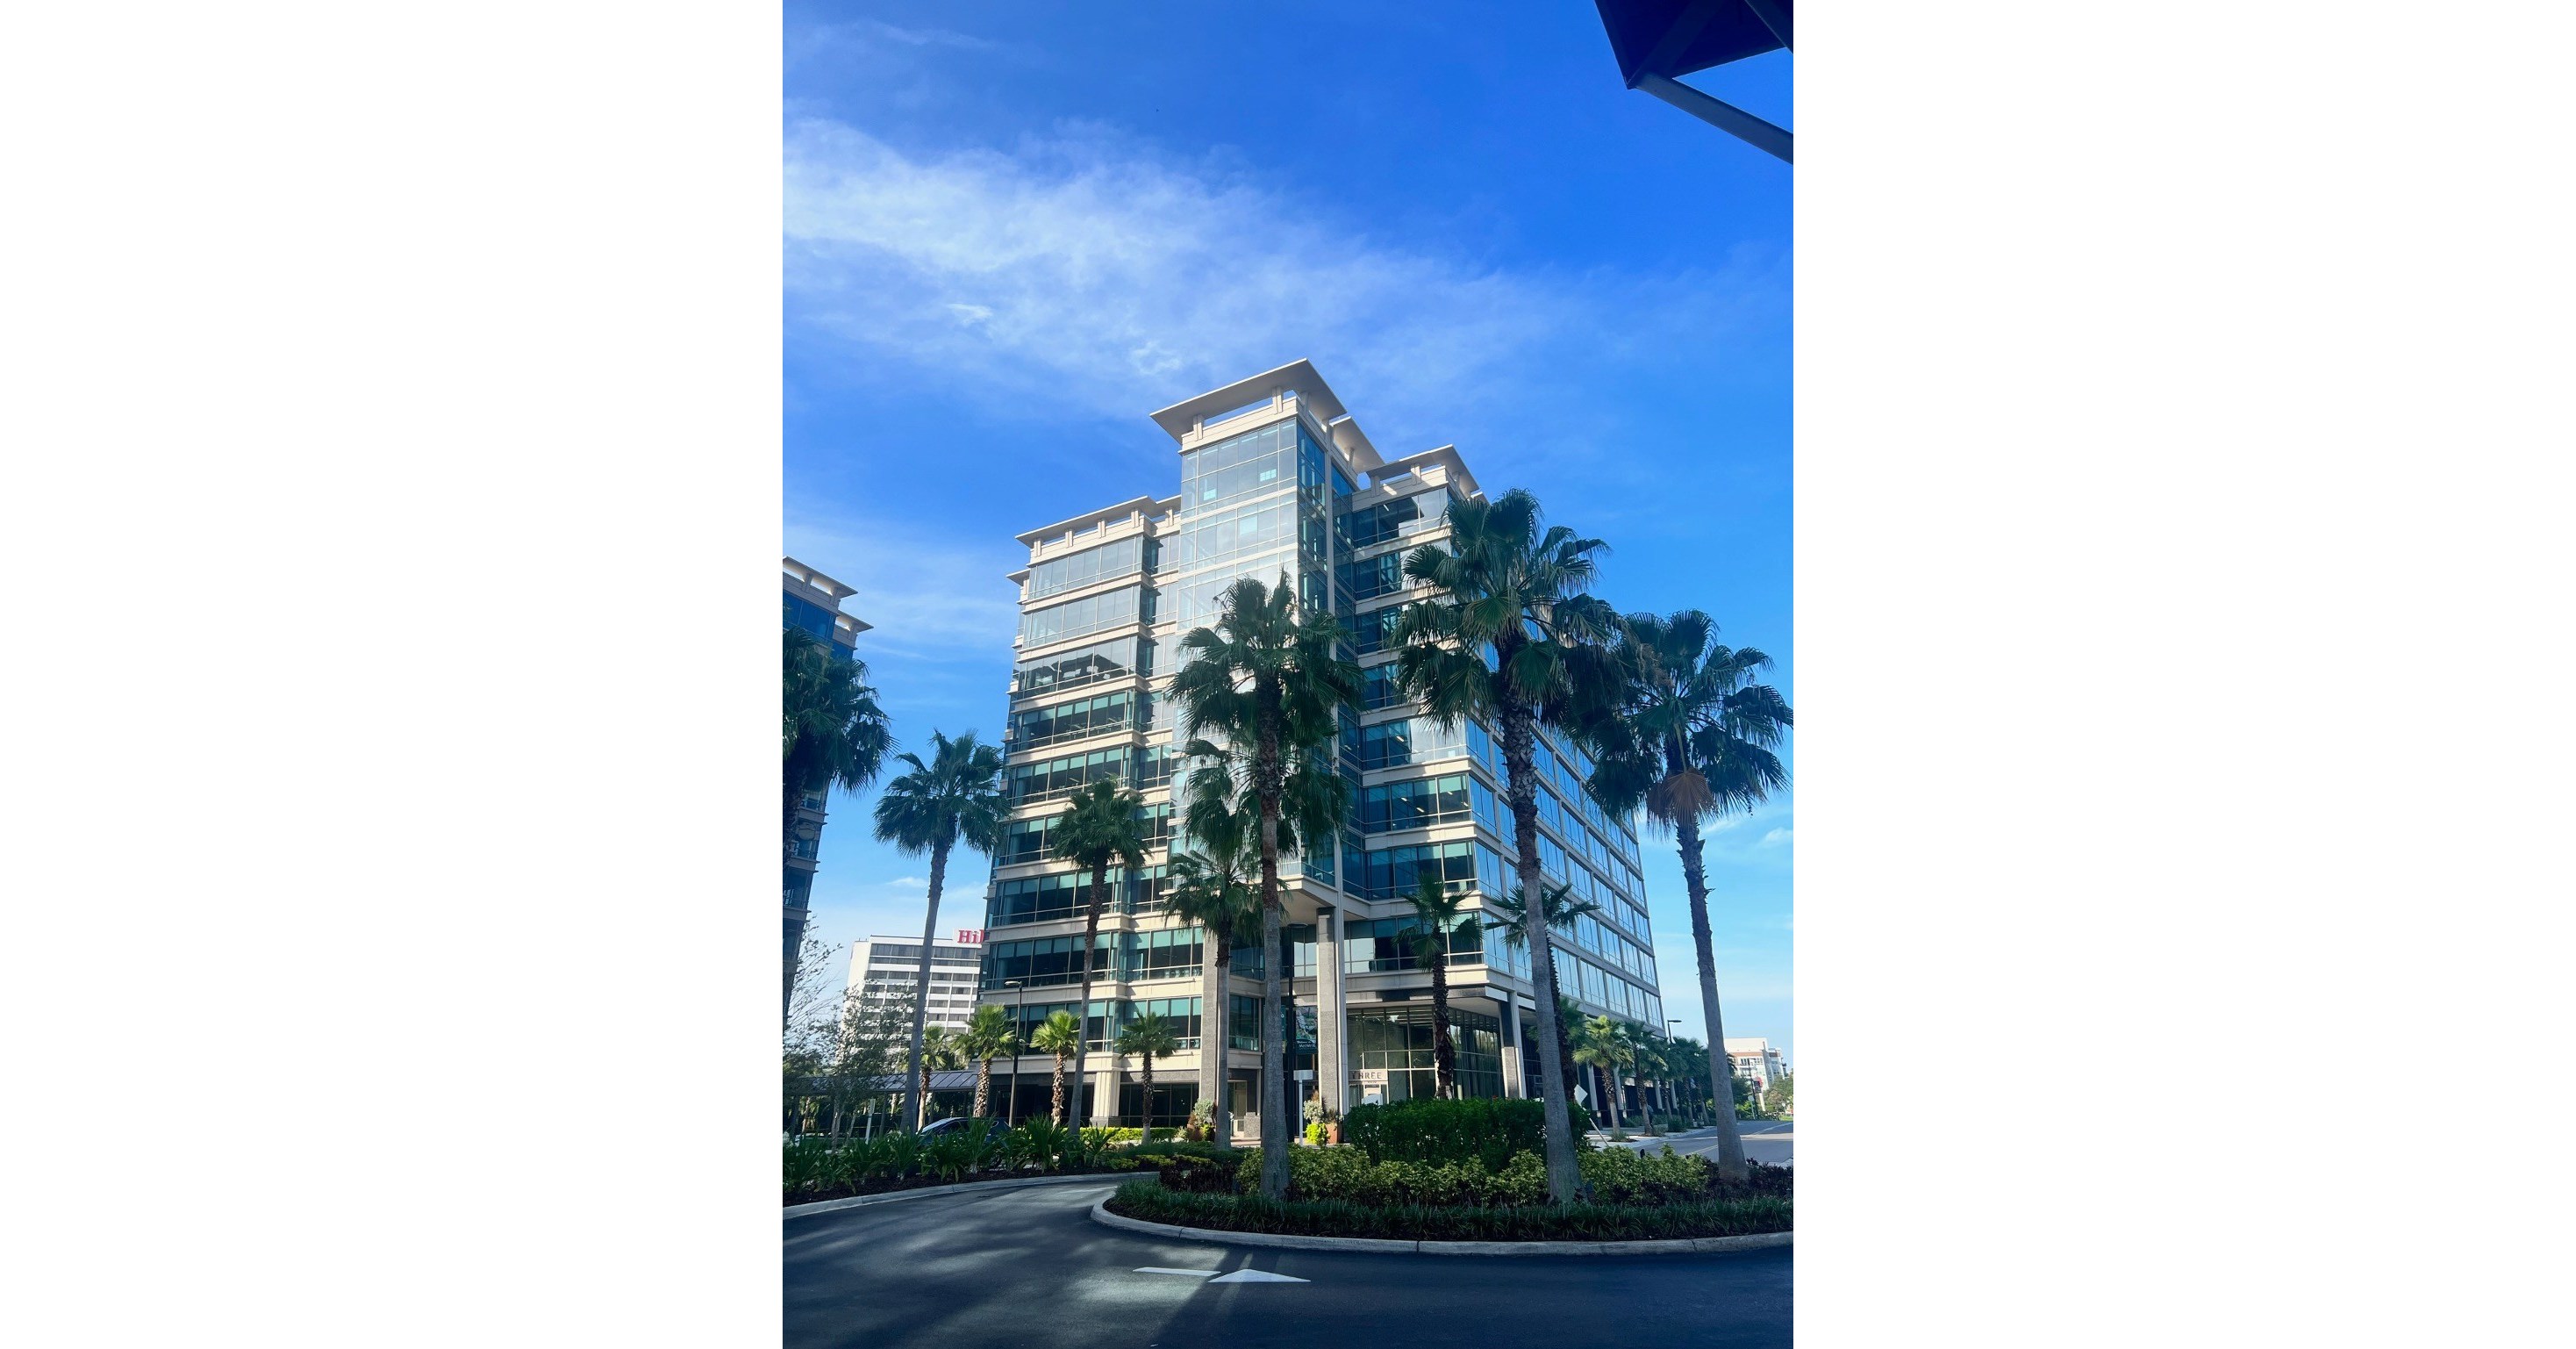 SPOT TO OPEN FIFTH U.S. OFFICE LOCATED IN TAMPA, FLORIDA